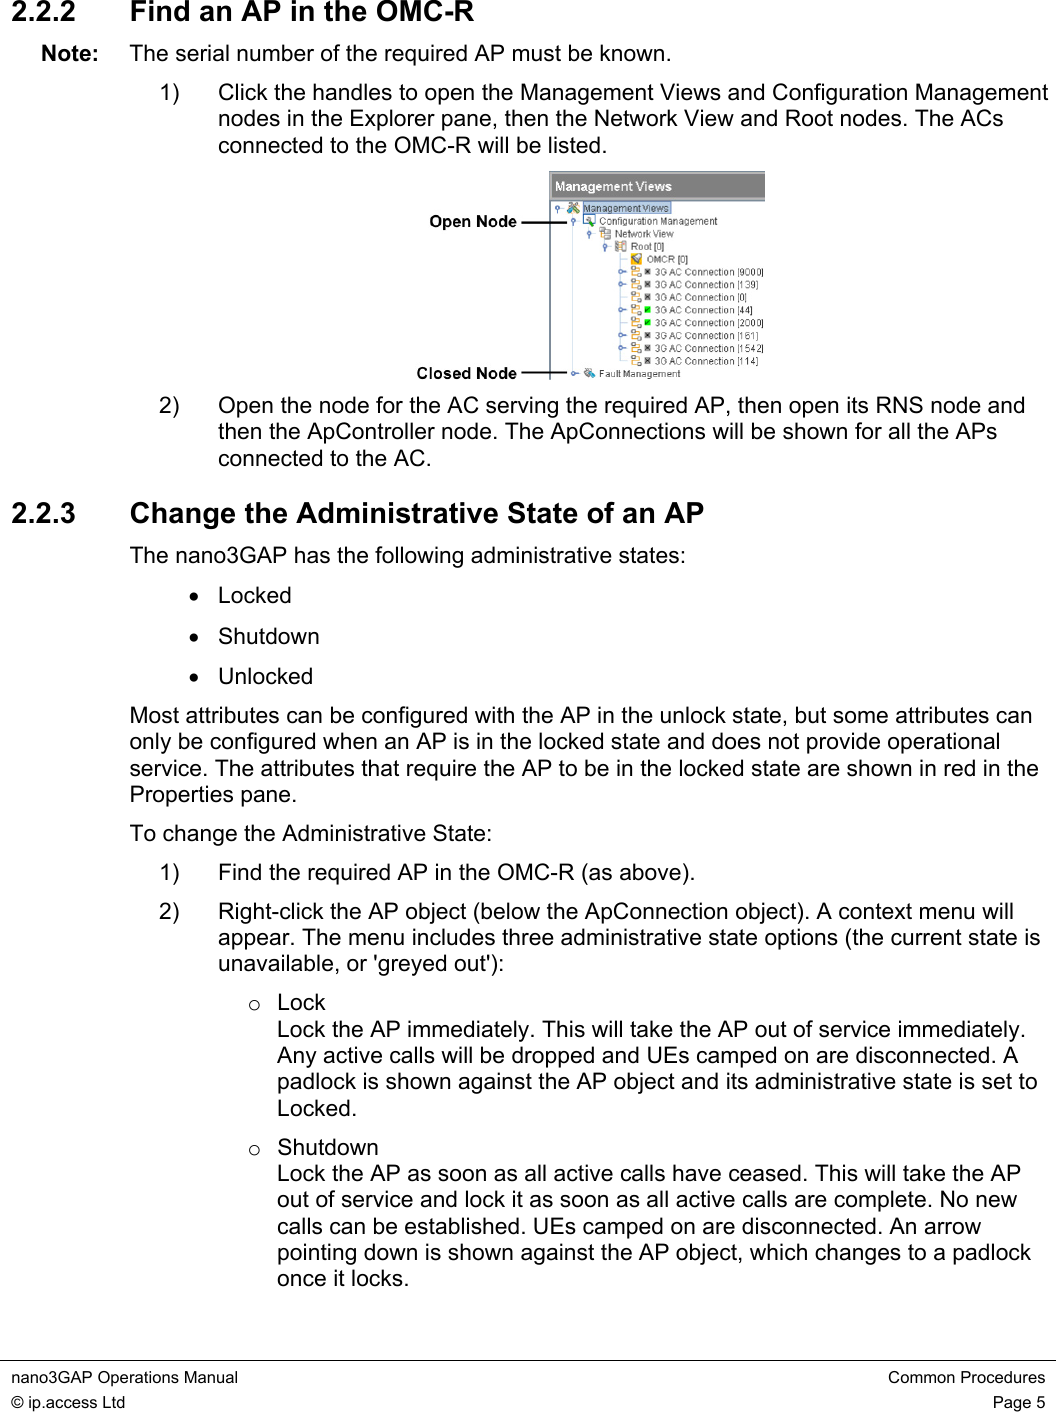 nano3GAP Operations Manual  Common Procedures © ip.access Ltd  Page 5  2.2.2  Find an AP in the OMC-R Note:  The serial number of the required AP must be known. 1)  Click the handles to open the Management Views and Configuration Management nodes in the Explorer pane, then the Network View and Root nodes. The ACs connected to the OMC-R will be listed.  2)  Open the node for the AC serving the required AP, then open its RNS node and then the ApController node. The ApConnections will be shown for all the APs connected to the AC. 2.2.3  Change the Administrative State of an AP The nano3GAP has the following administrative states: • Locked • Shutdown • Unlocked Most attributes can be configured with the AP in the unlock state, but some attributes can only be configured when an AP is in the locked state and does not provide operational service. The attributes that require the AP to be in the locked state are shown in red in the Properties pane. To change the Administrative State: 1)  Find the required AP in the OMC-R (as above). 2)  Right-click the AP object (below the ApConnection object). A context menu will appear. The menu includes three administrative state options (the current state is unavailable, or &apos;greyed out&apos;): o Lock Lock the AP immediately. This will take the AP out of service immediately. Any active calls will be dropped and UEs camped on are disconnected. A padlock is shown against the AP object and its administrative state is set to Locked. o Shutdown Lock the AP as soon as all active calls have ceased. This will take the AP out of service and lock it as soon as all active calls are complete. No new calls can be established. UEs camped on are disconnected. An arrow pointing down is shown against the AP object, which changes to a padlock once it locks. 